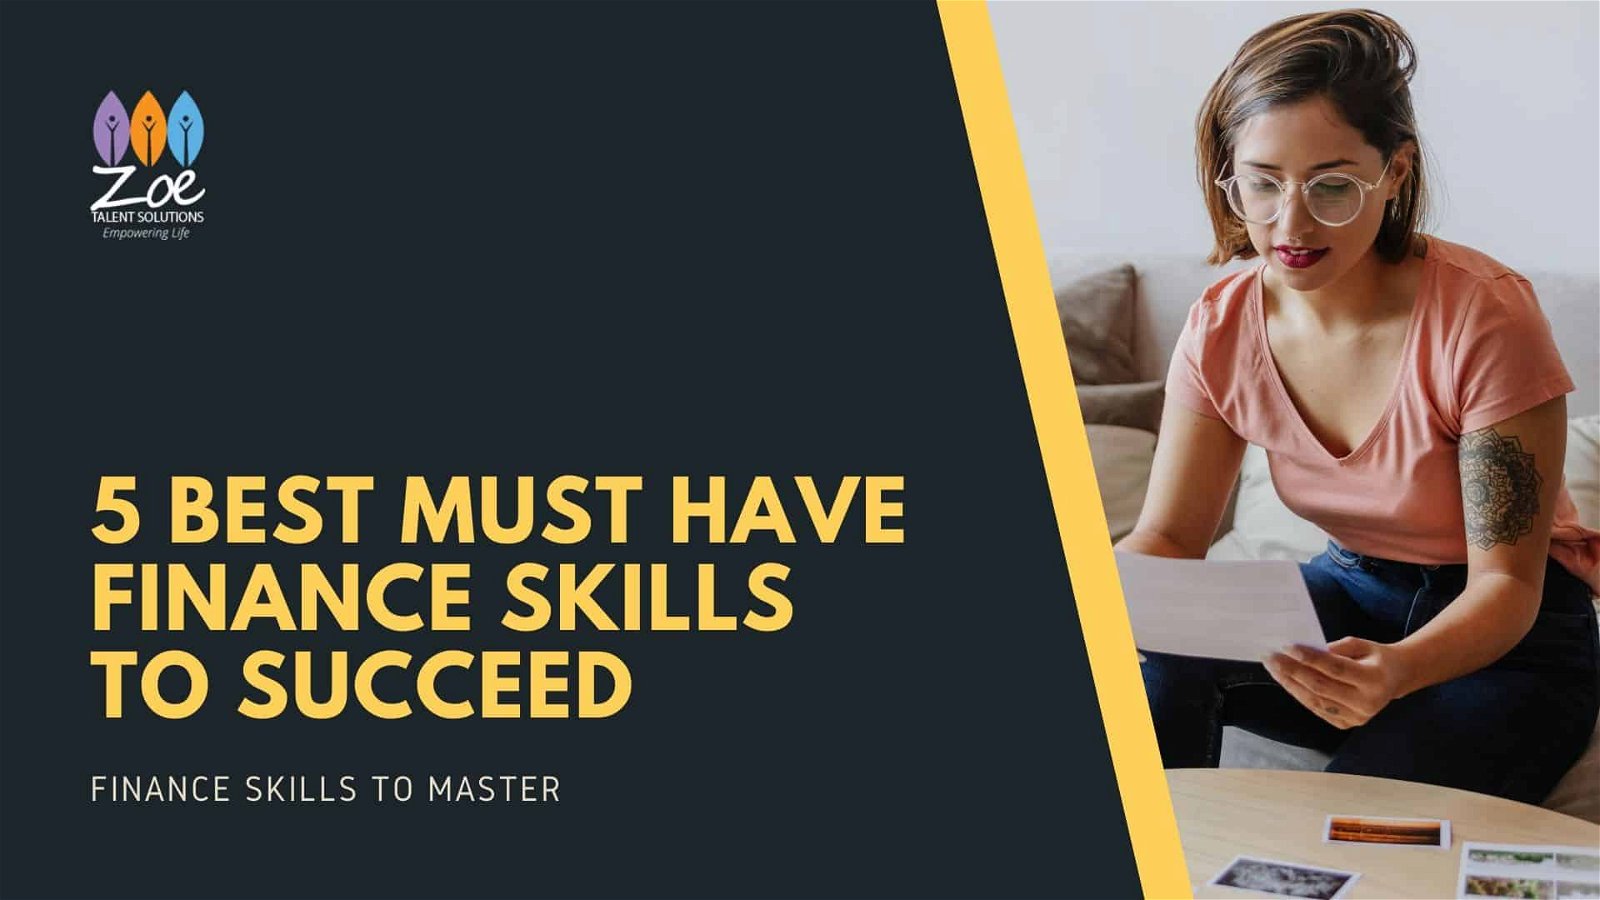 5 Best Must Have Finance Skills to Succeed